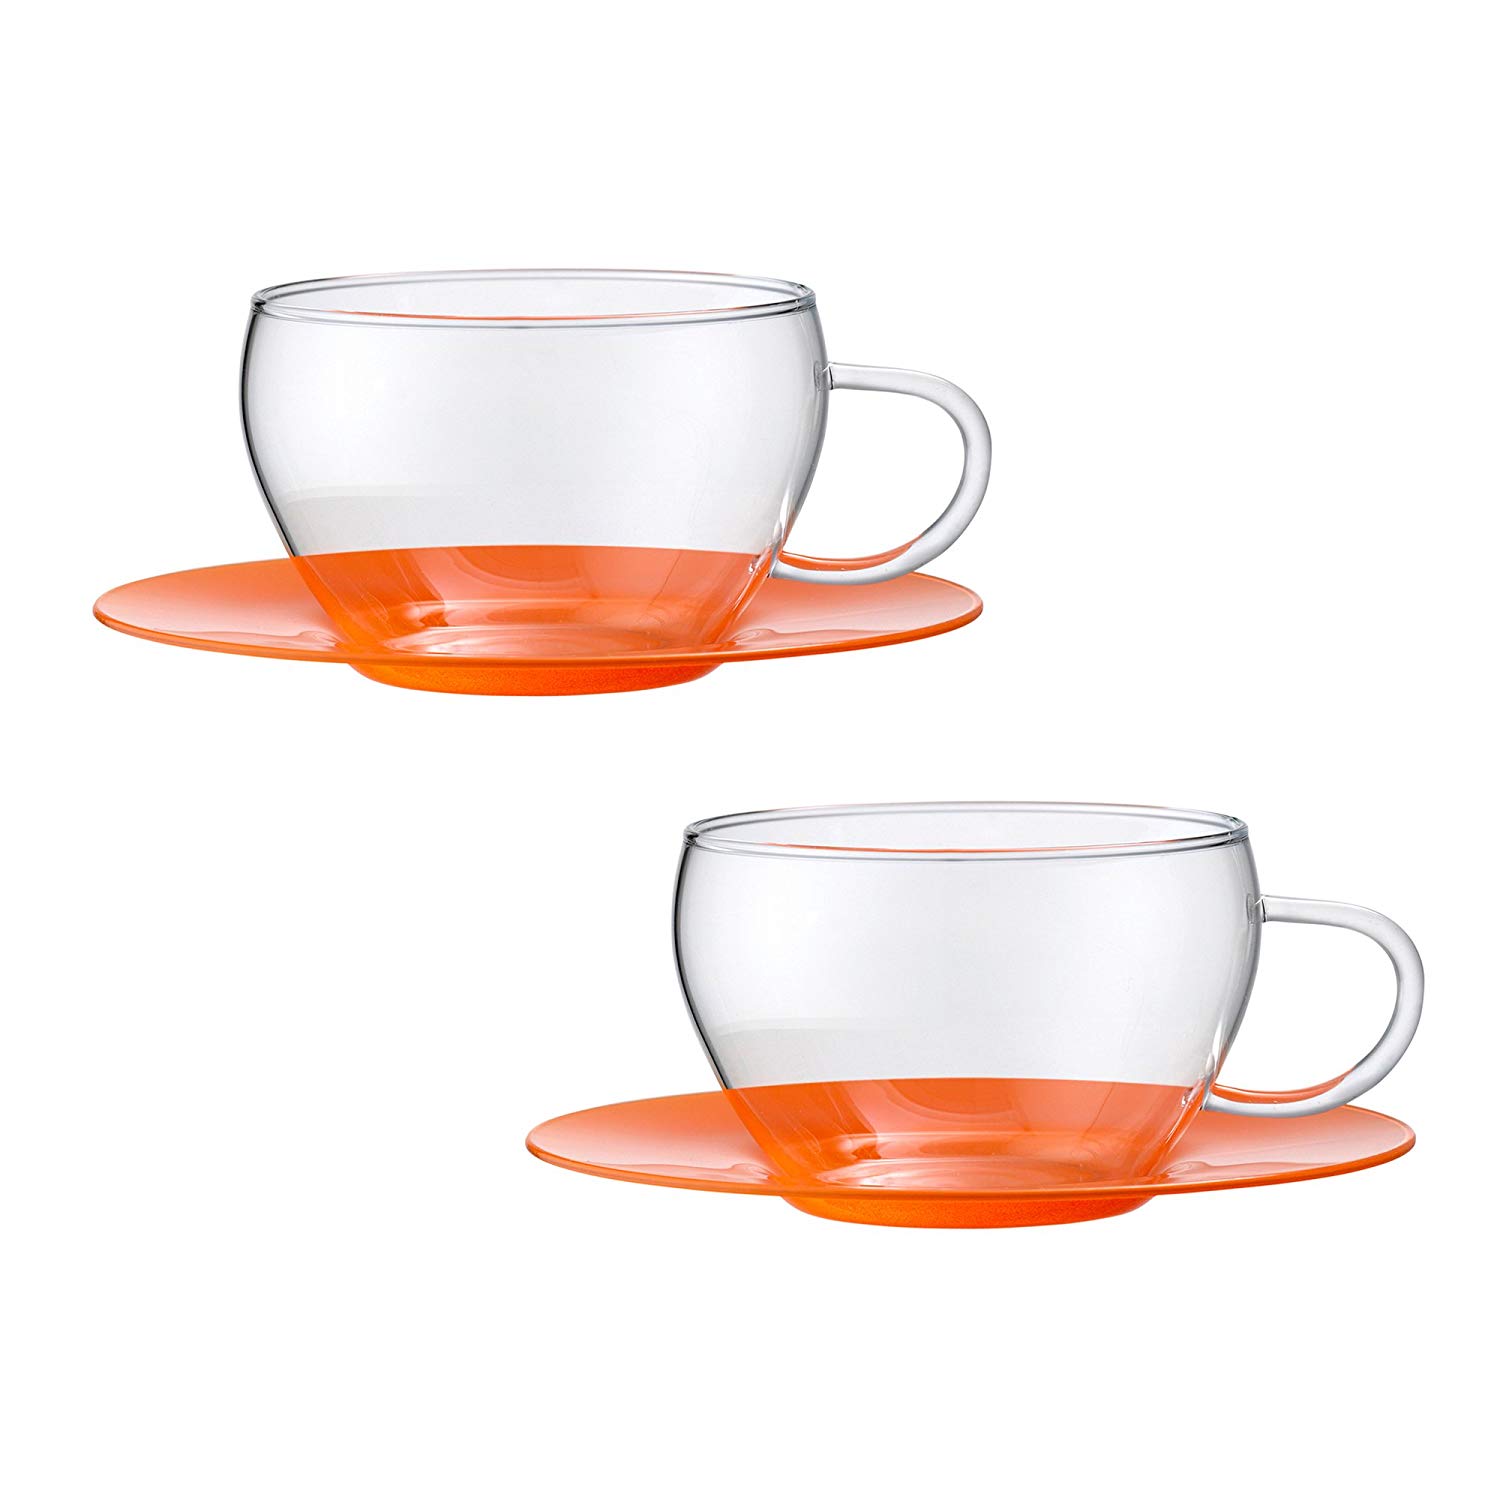 Bohemia Cristal 093 012 097 Play Of Colors Set Of 2 Plastic Saucer With Cof